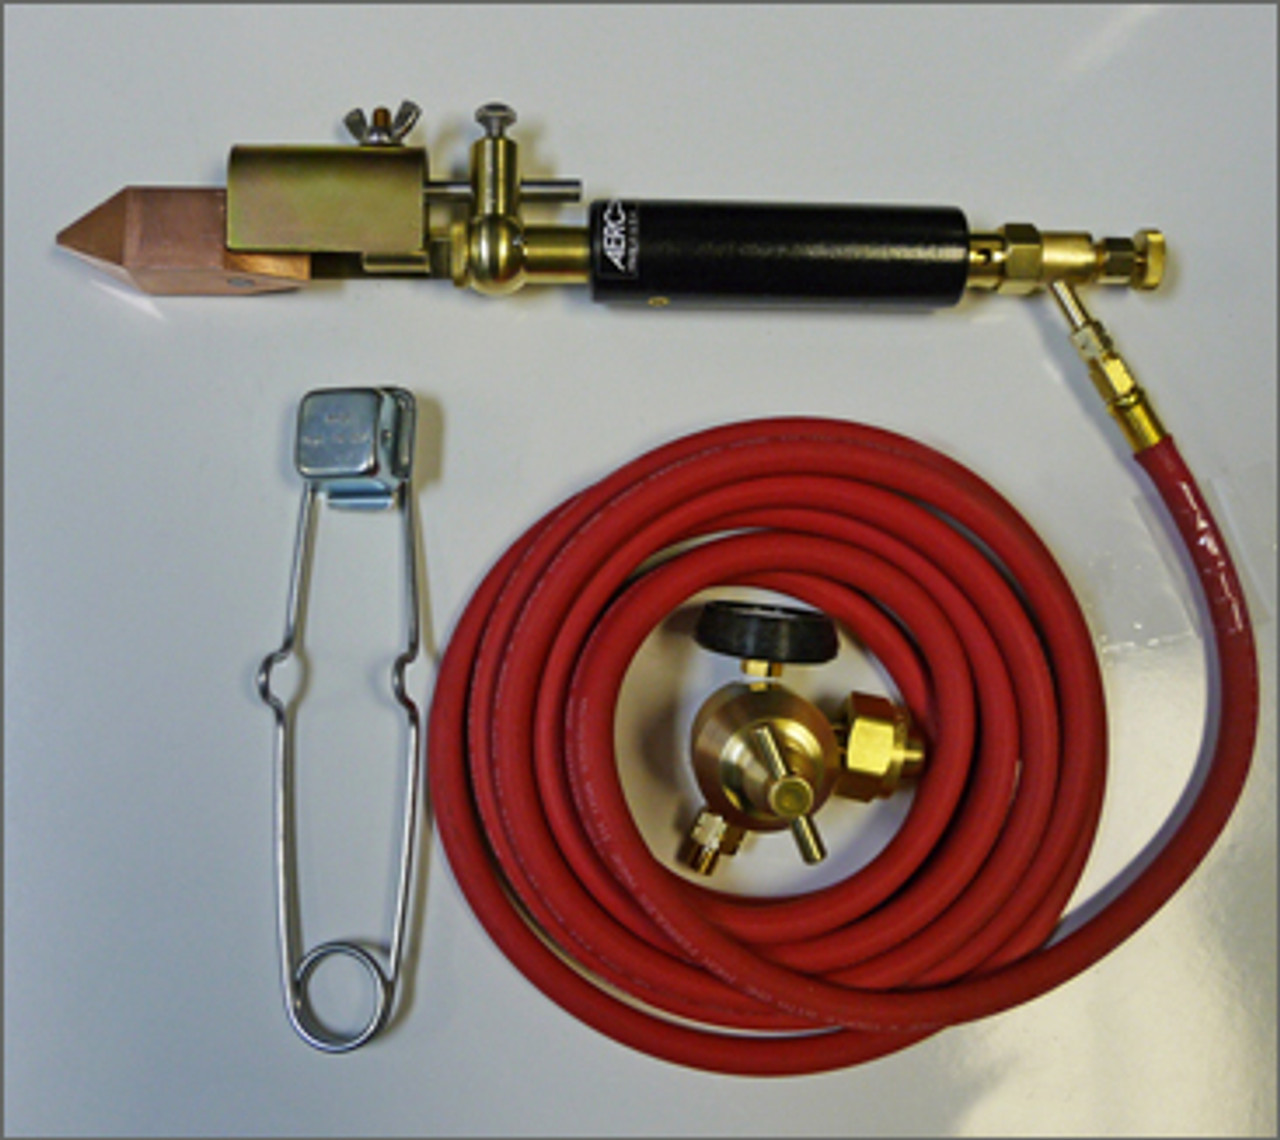 Acetylene-Soldering-Iron-Torch-Kit-#11-1.25 lb-Copper Tip Slip-On Connection Free Shipping